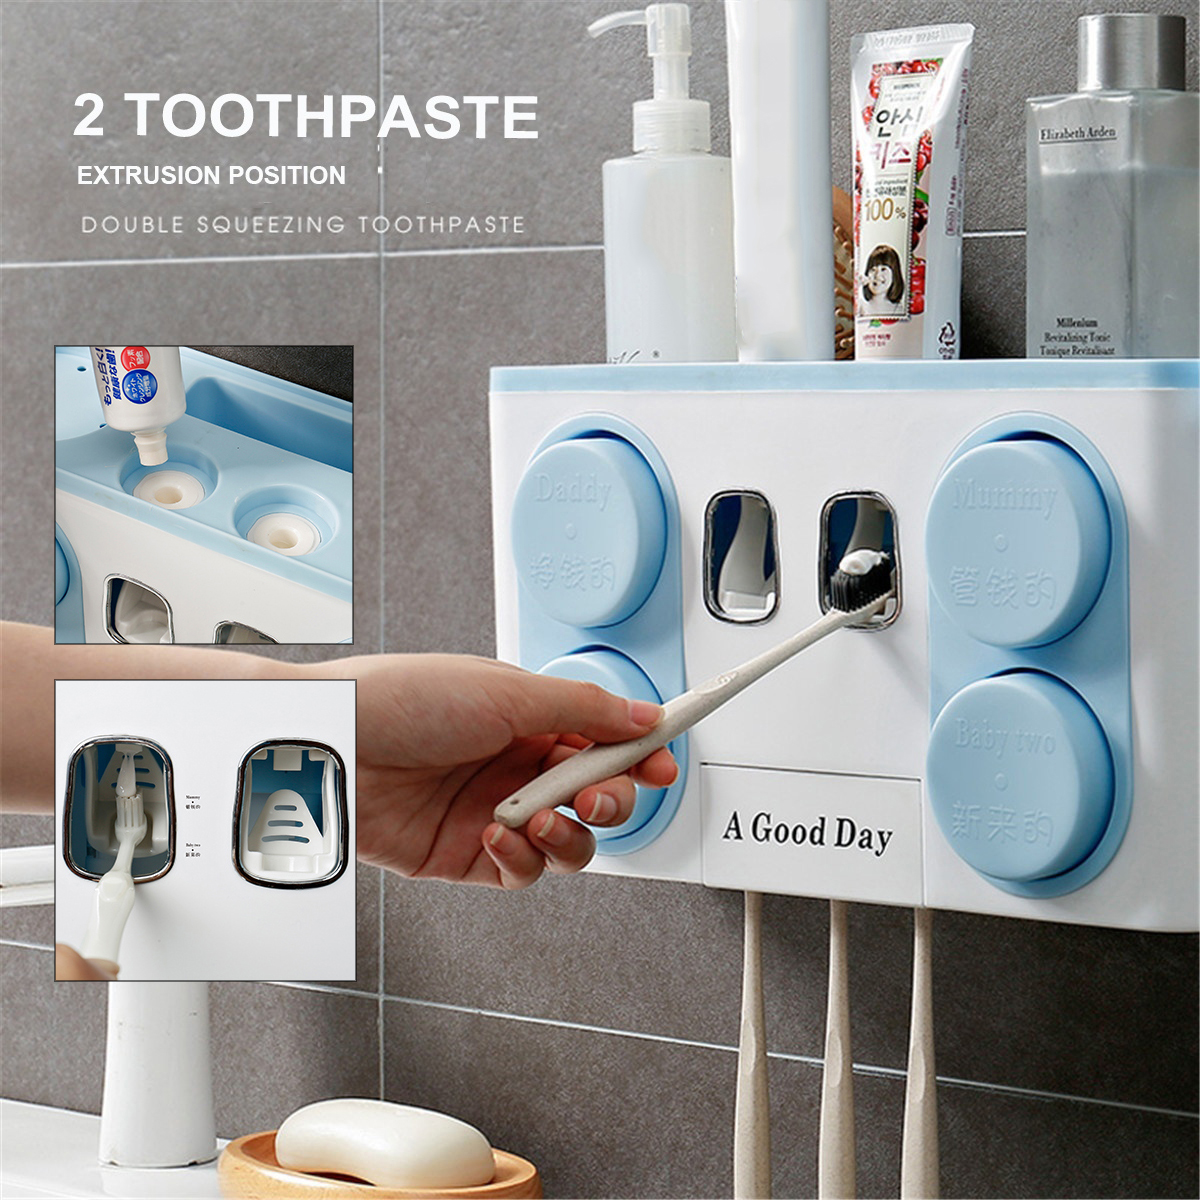 Multifunctional-Automatic-Toothpaste-Squeezer-Set-Wall-Mount-Suction-Cup-Toothbrush-Holder-Bathroom--1555695-2